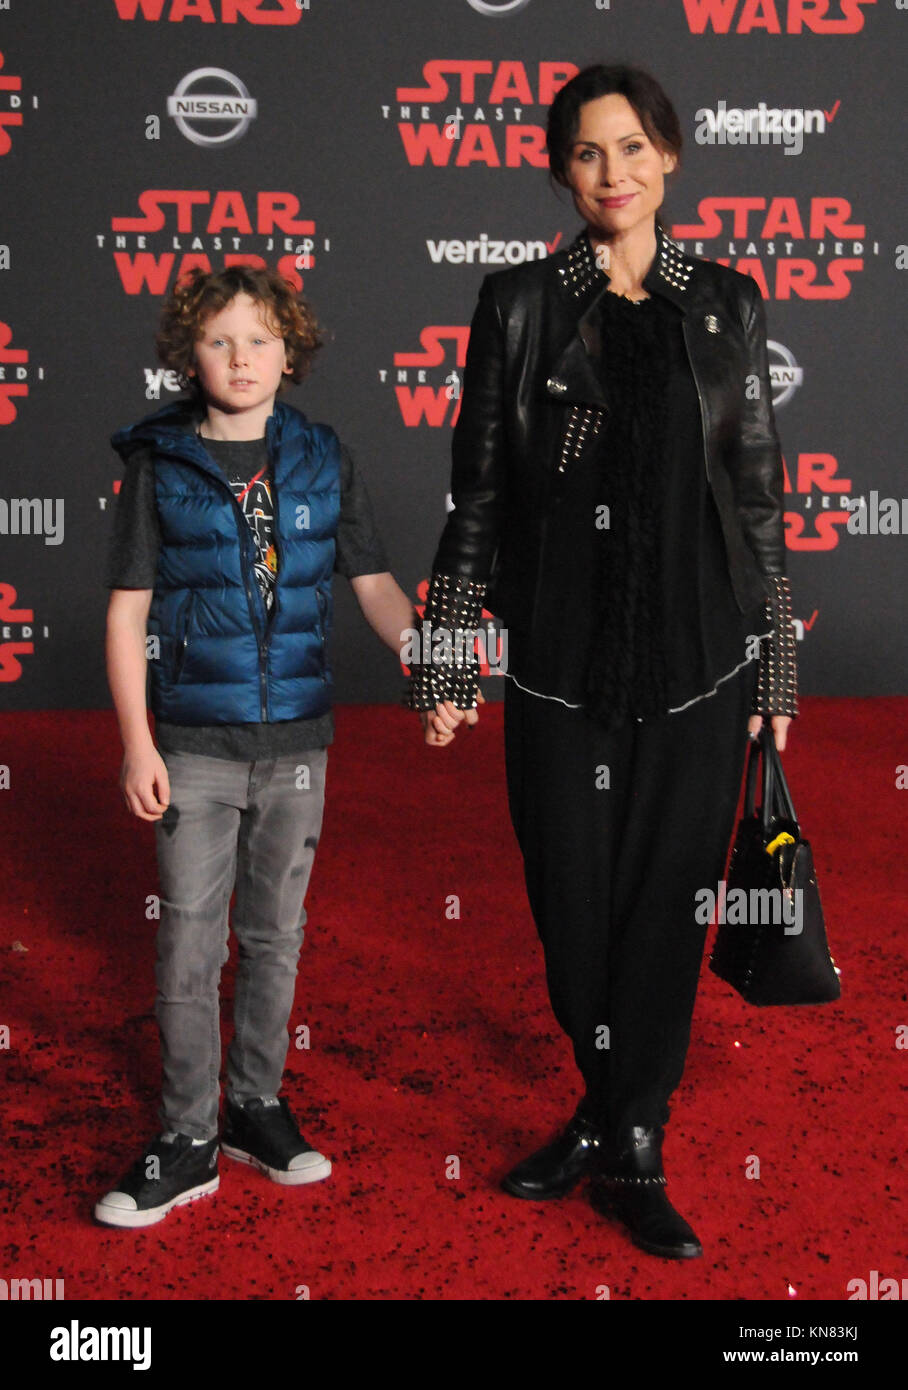 Los Angeles, USA. 09th Dec, 2017. Actress Minnie Driver (R) and son Henry Story Driver (L) attend the World Premiere of Disney Pictures and Lucasfilm's 'Star Wars: The Last Jedi' at The Shrine Auditorium on December 9, 2017 in Los Angeles, California. Photo by Barry King/Alamy Live News Credit: Barry King/Alamy Live News Stock Photo